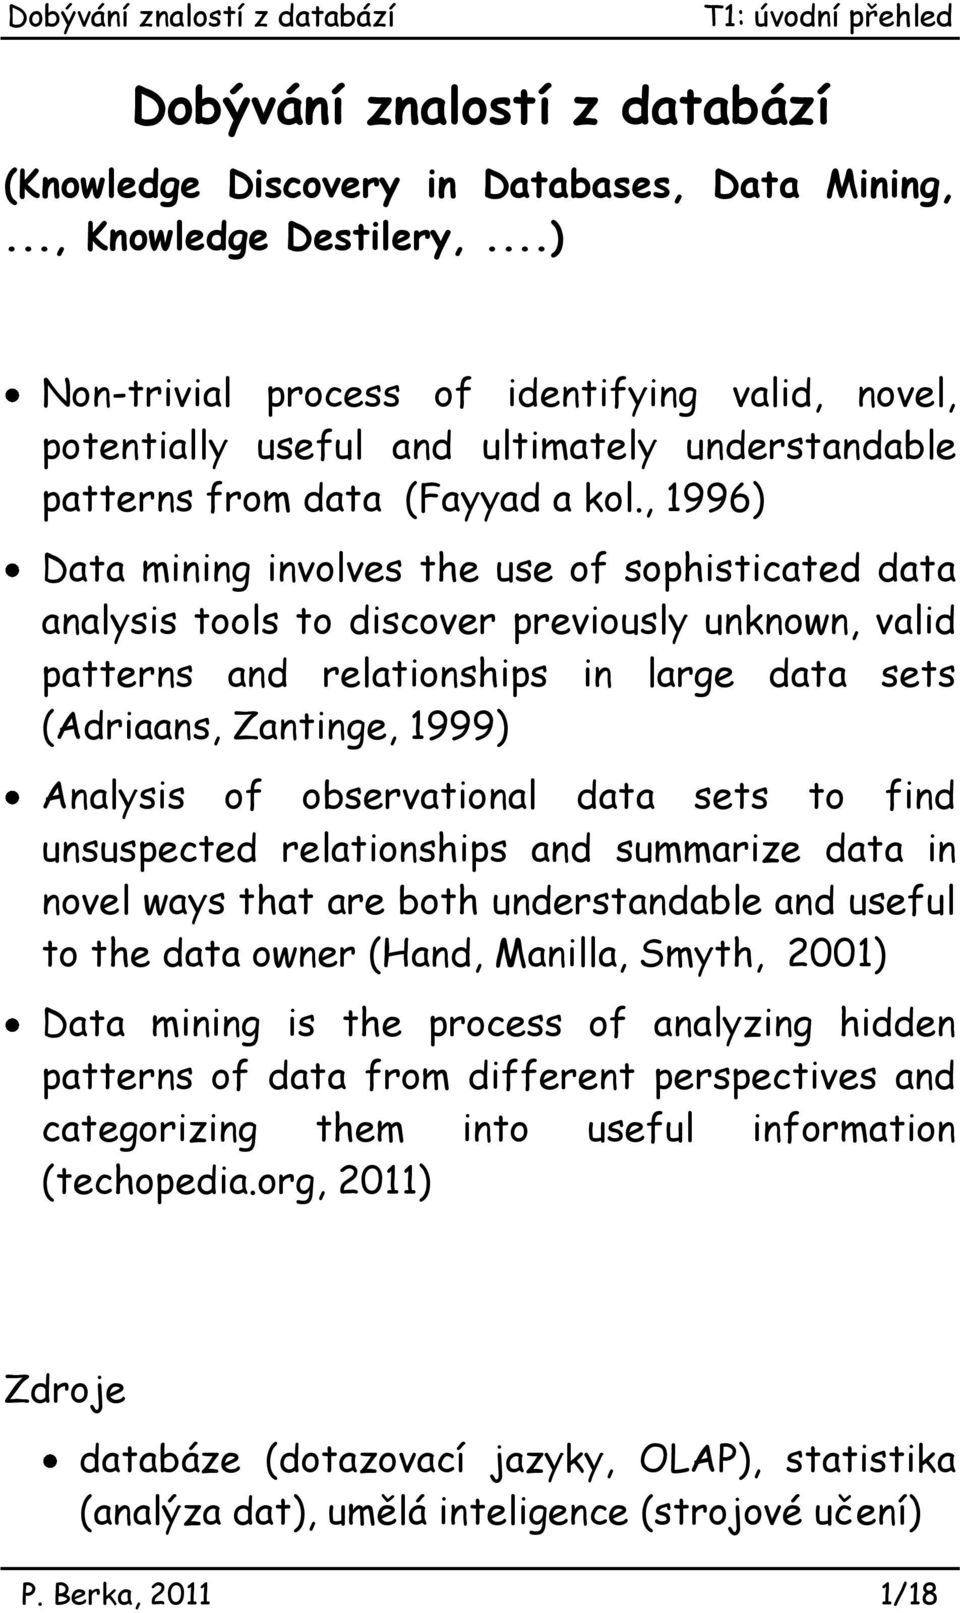 , 1996) Data mining involves the use of sophisticated data analysis tools to discover previously unknown, valid patterns and relationships in large data sets (Adriaans, Zantinge, 1999) Analysis of